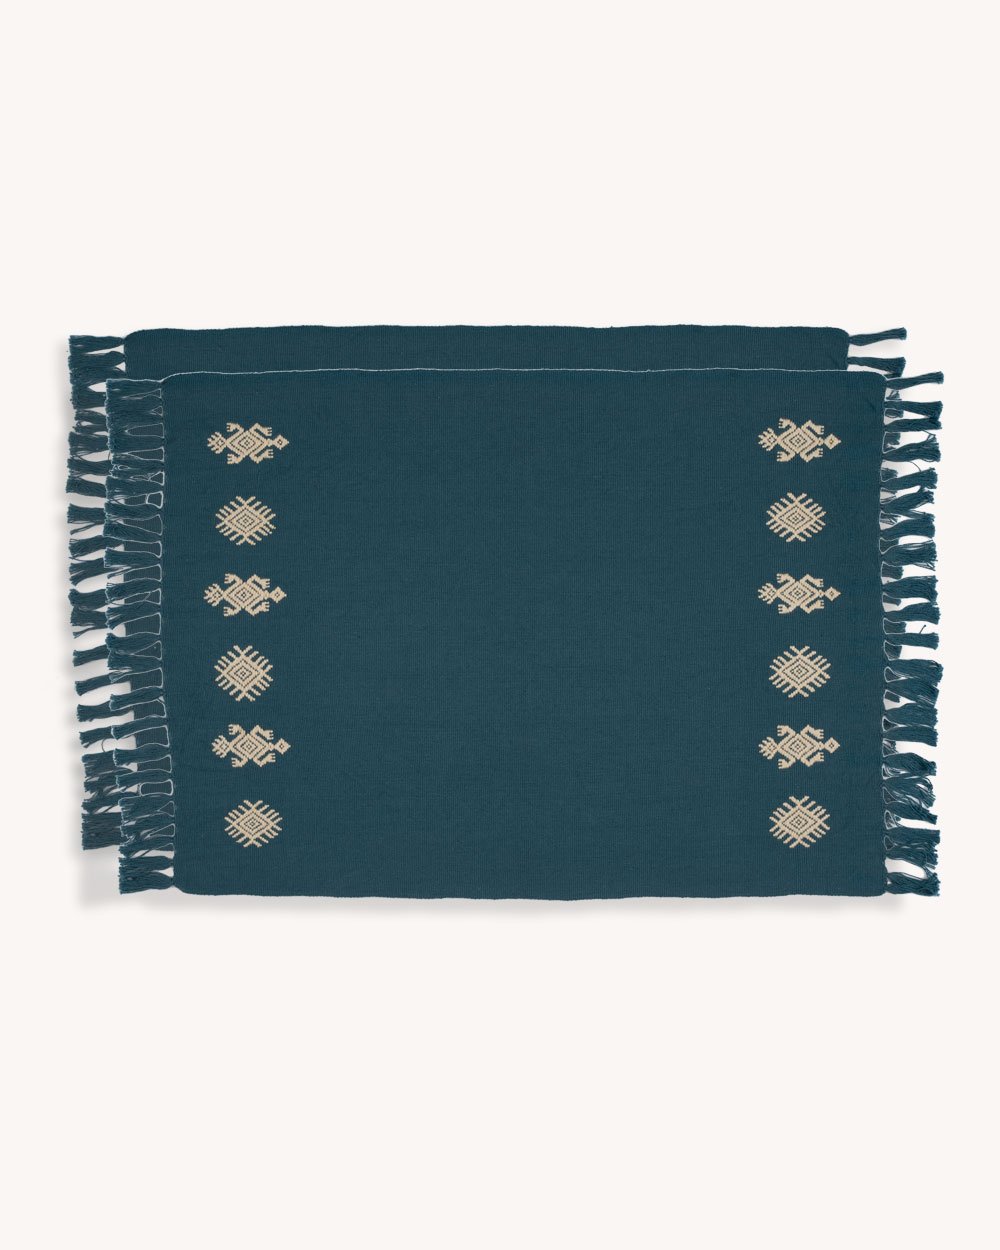 Routes-Tikal-placemats-teal-front.jpg